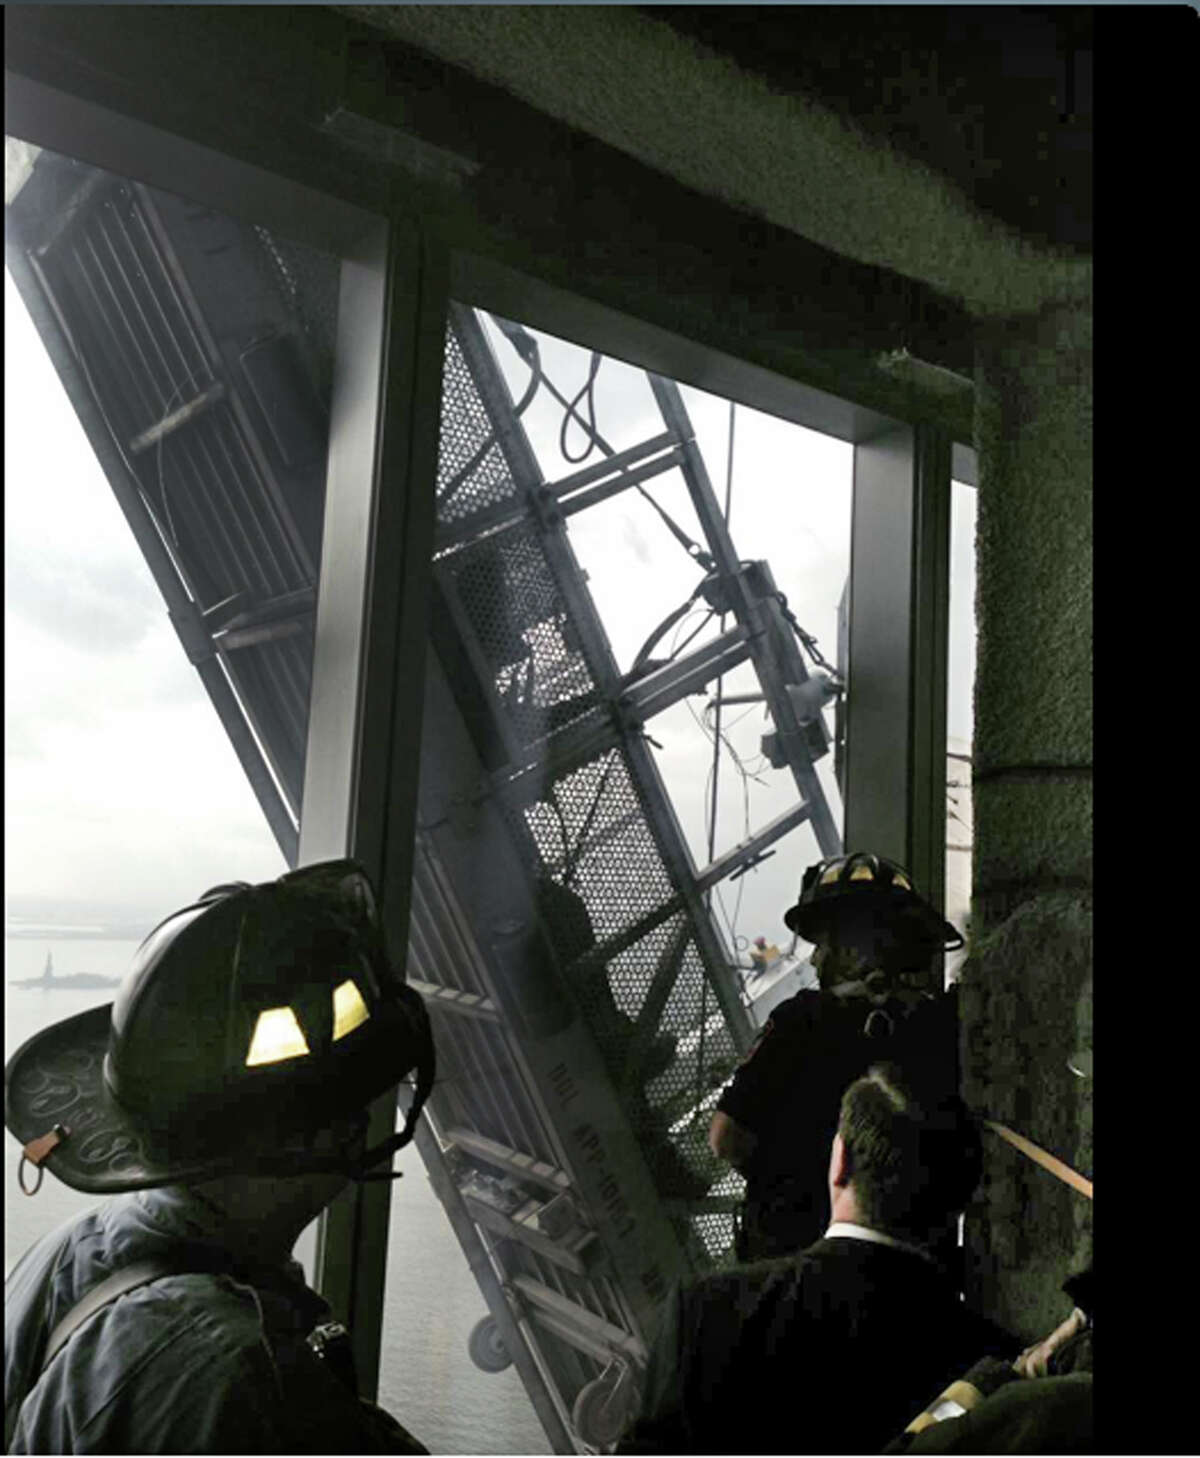 This photo, from the Fire Dept. of New York Twitter page, shows a window washer's gondola as it hangs from 1 World Trade Center. ﻿